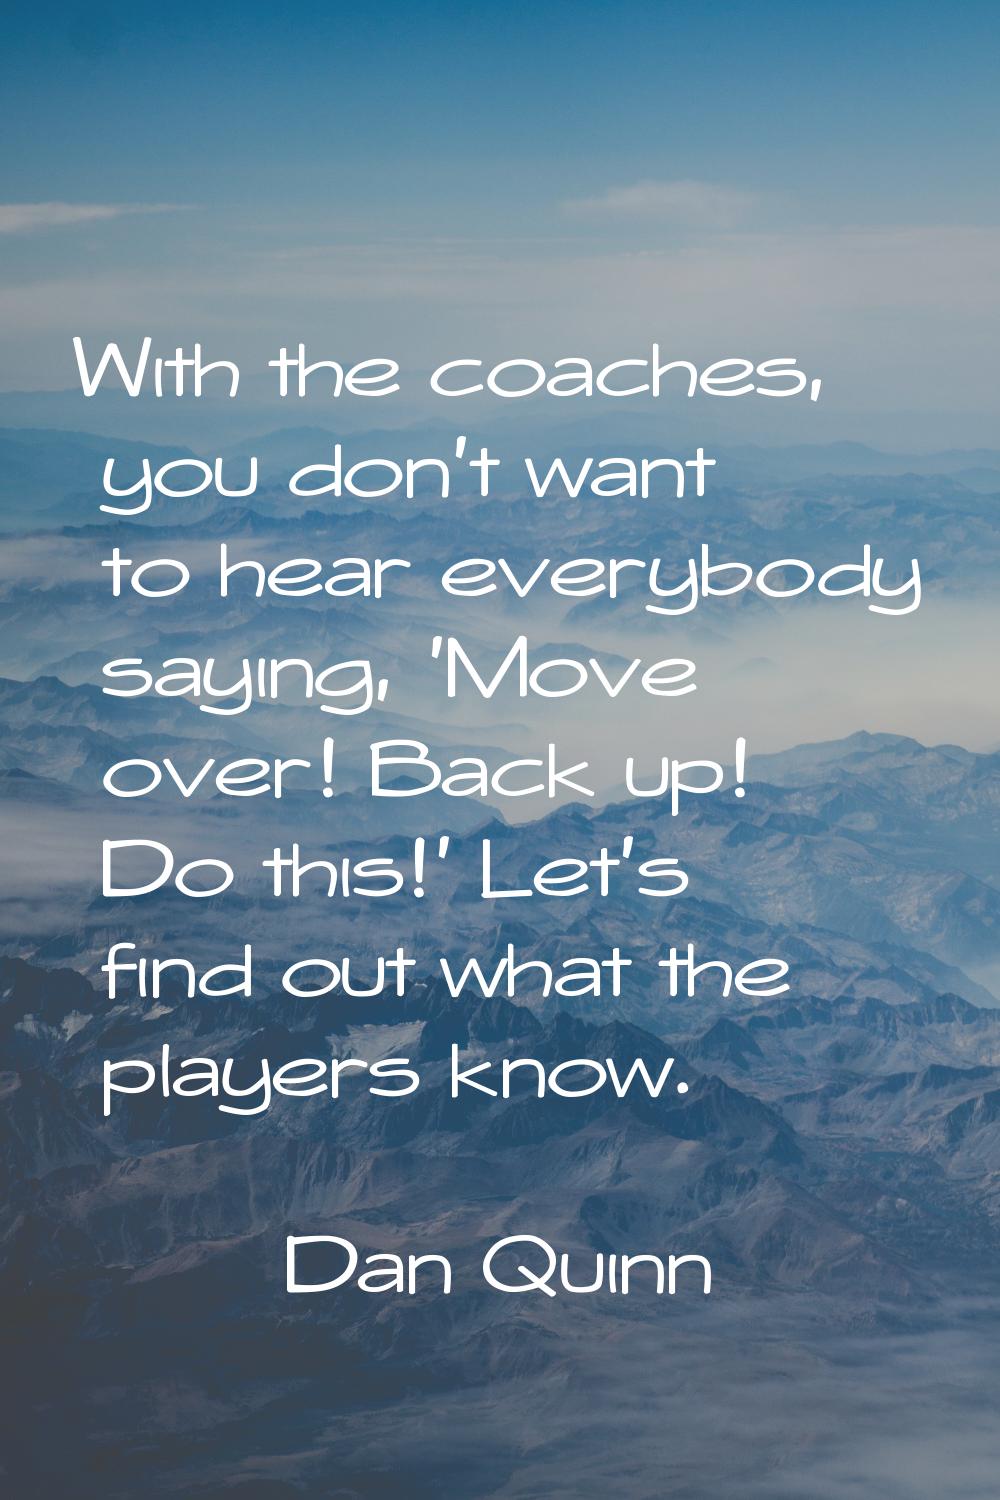 With the coaches, you don't want to hear everybody saying, 'Move over! Back up! Do this!' Let's fin